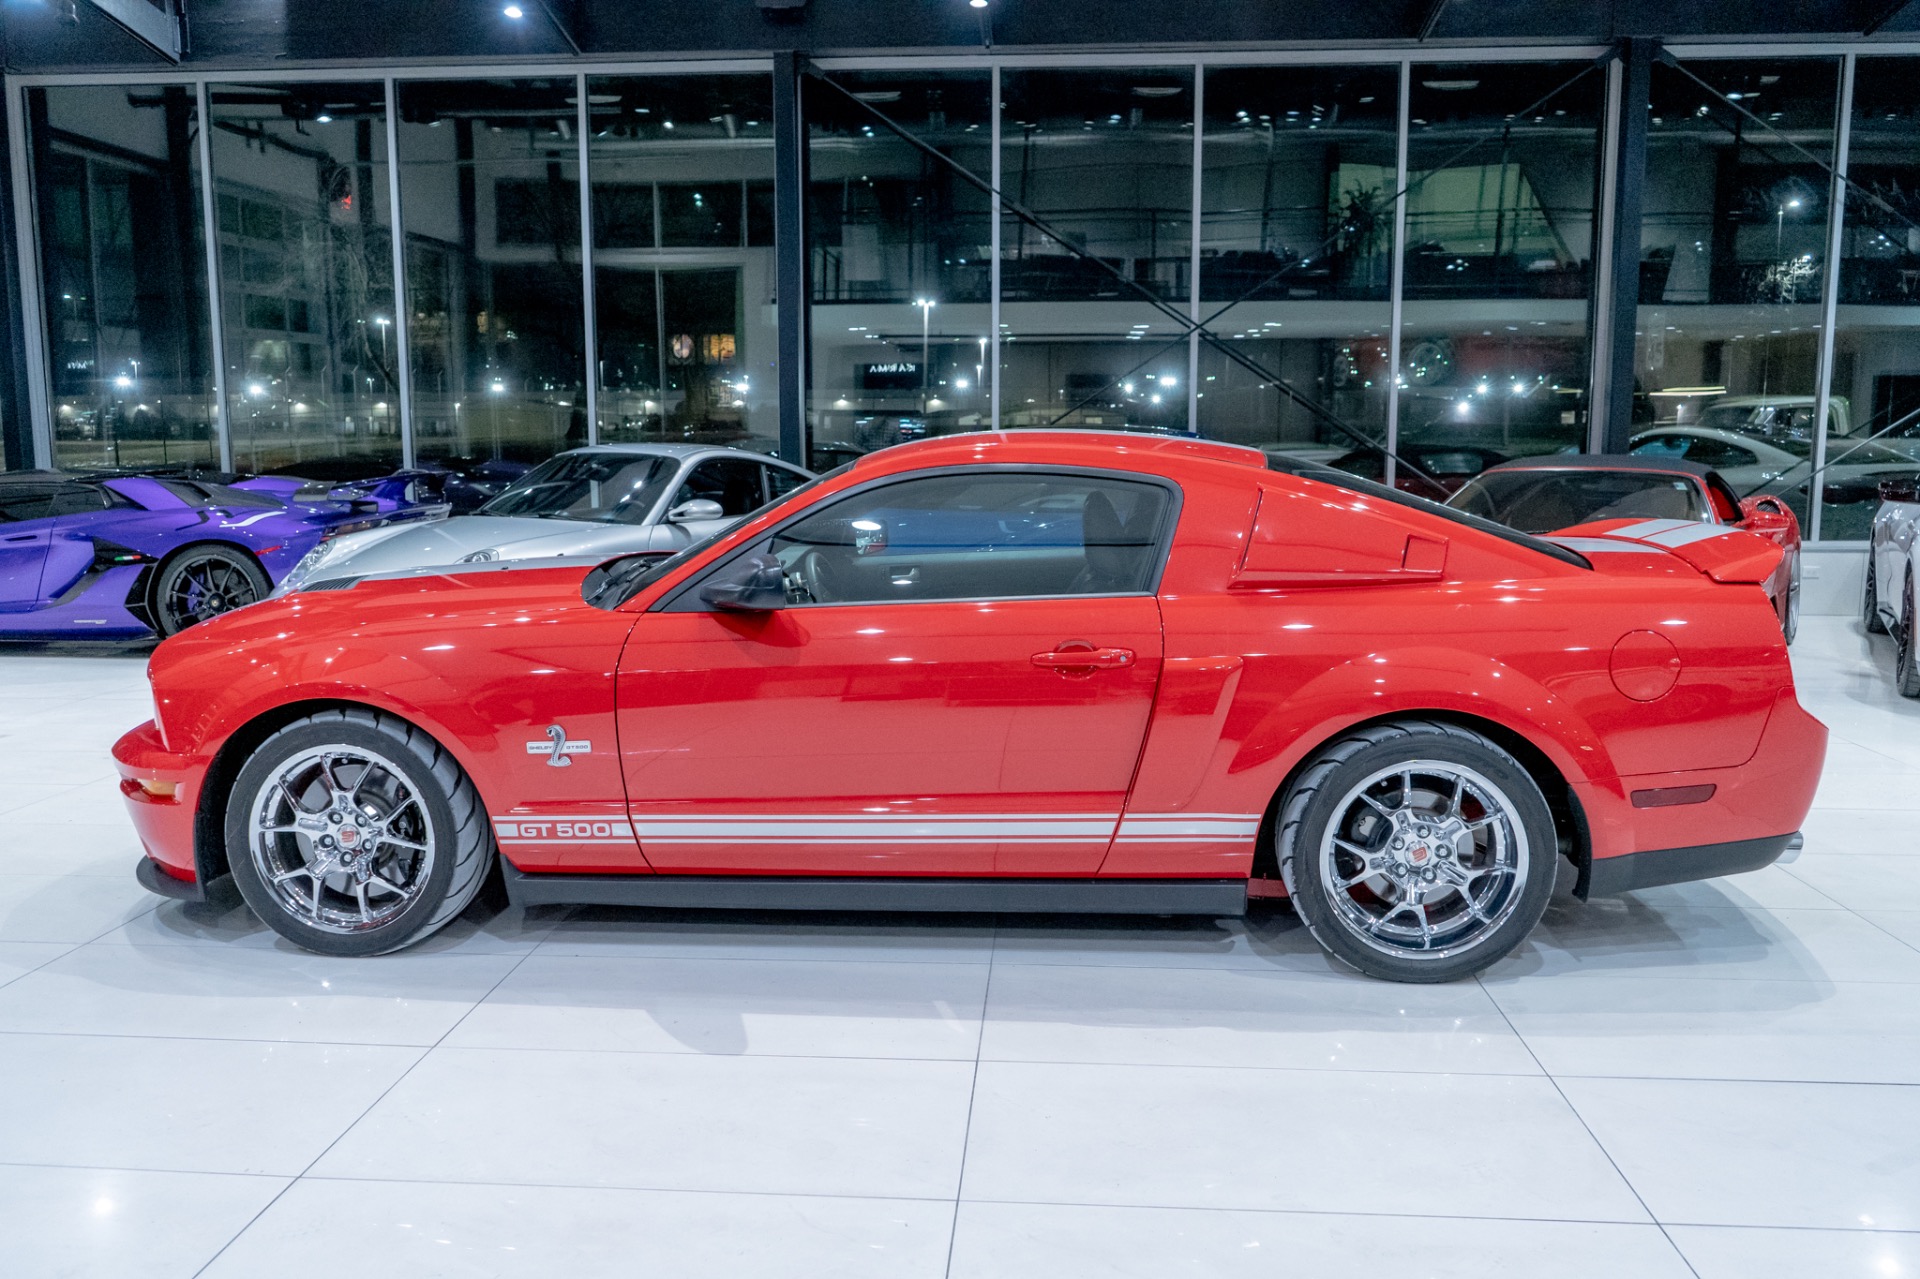 Used-2008-Ford-Shelby-GT500-Coupe-only-5k-Miles-660WHP-Tasteful-Upgrades-Incredible-condition